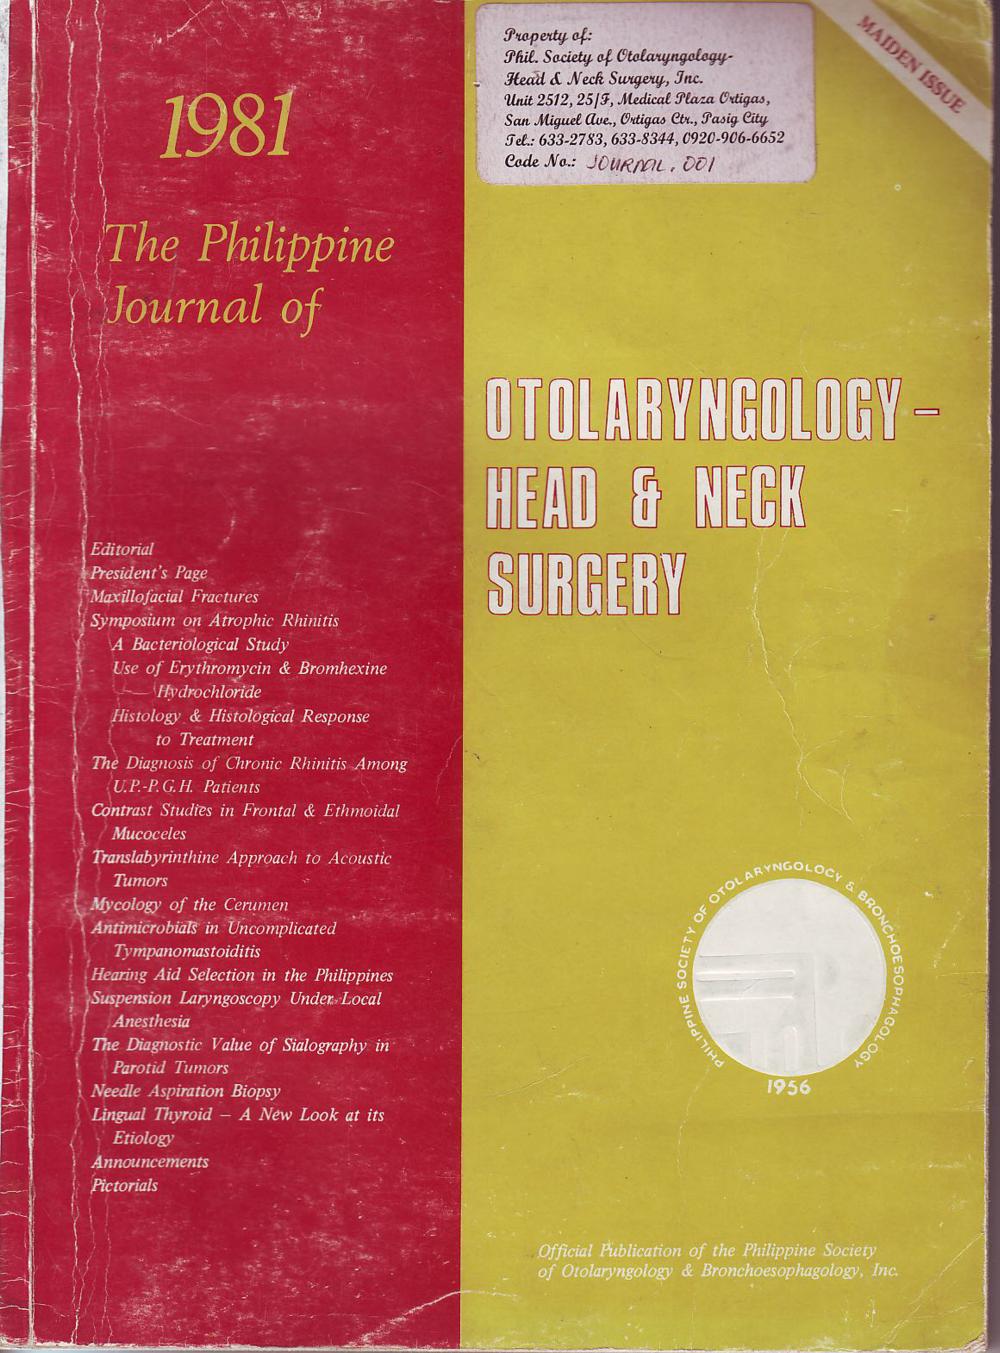 					View 1981: Philippine Journal of Otolaryngology-Head and Neck Surgery
				